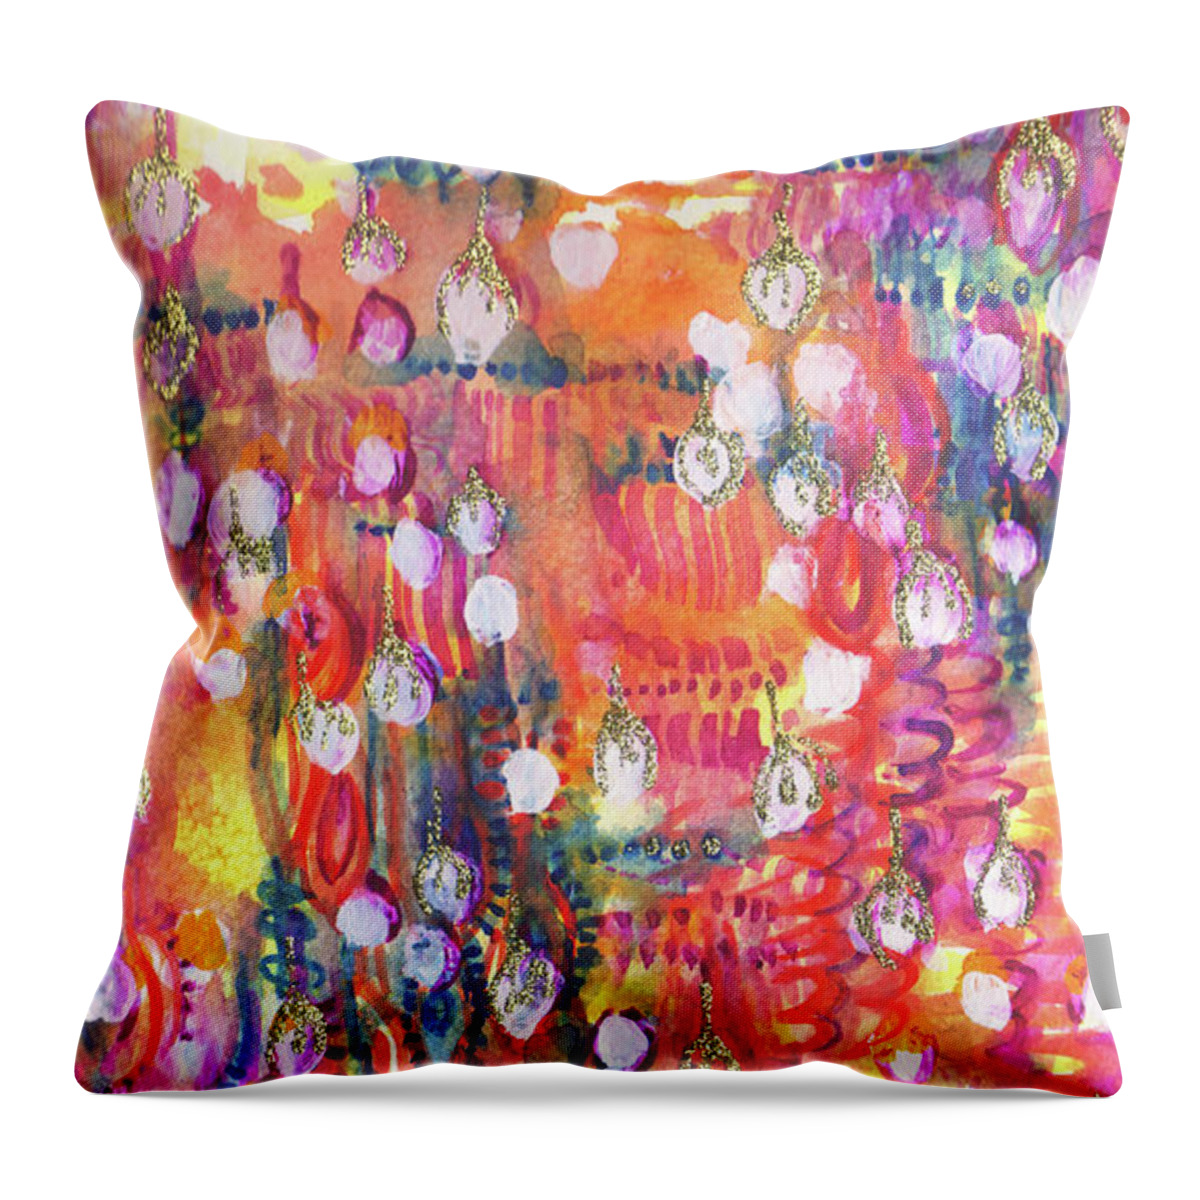 Landscape Throw Pillow featuring the painting Rain Forest by Saycred Blu